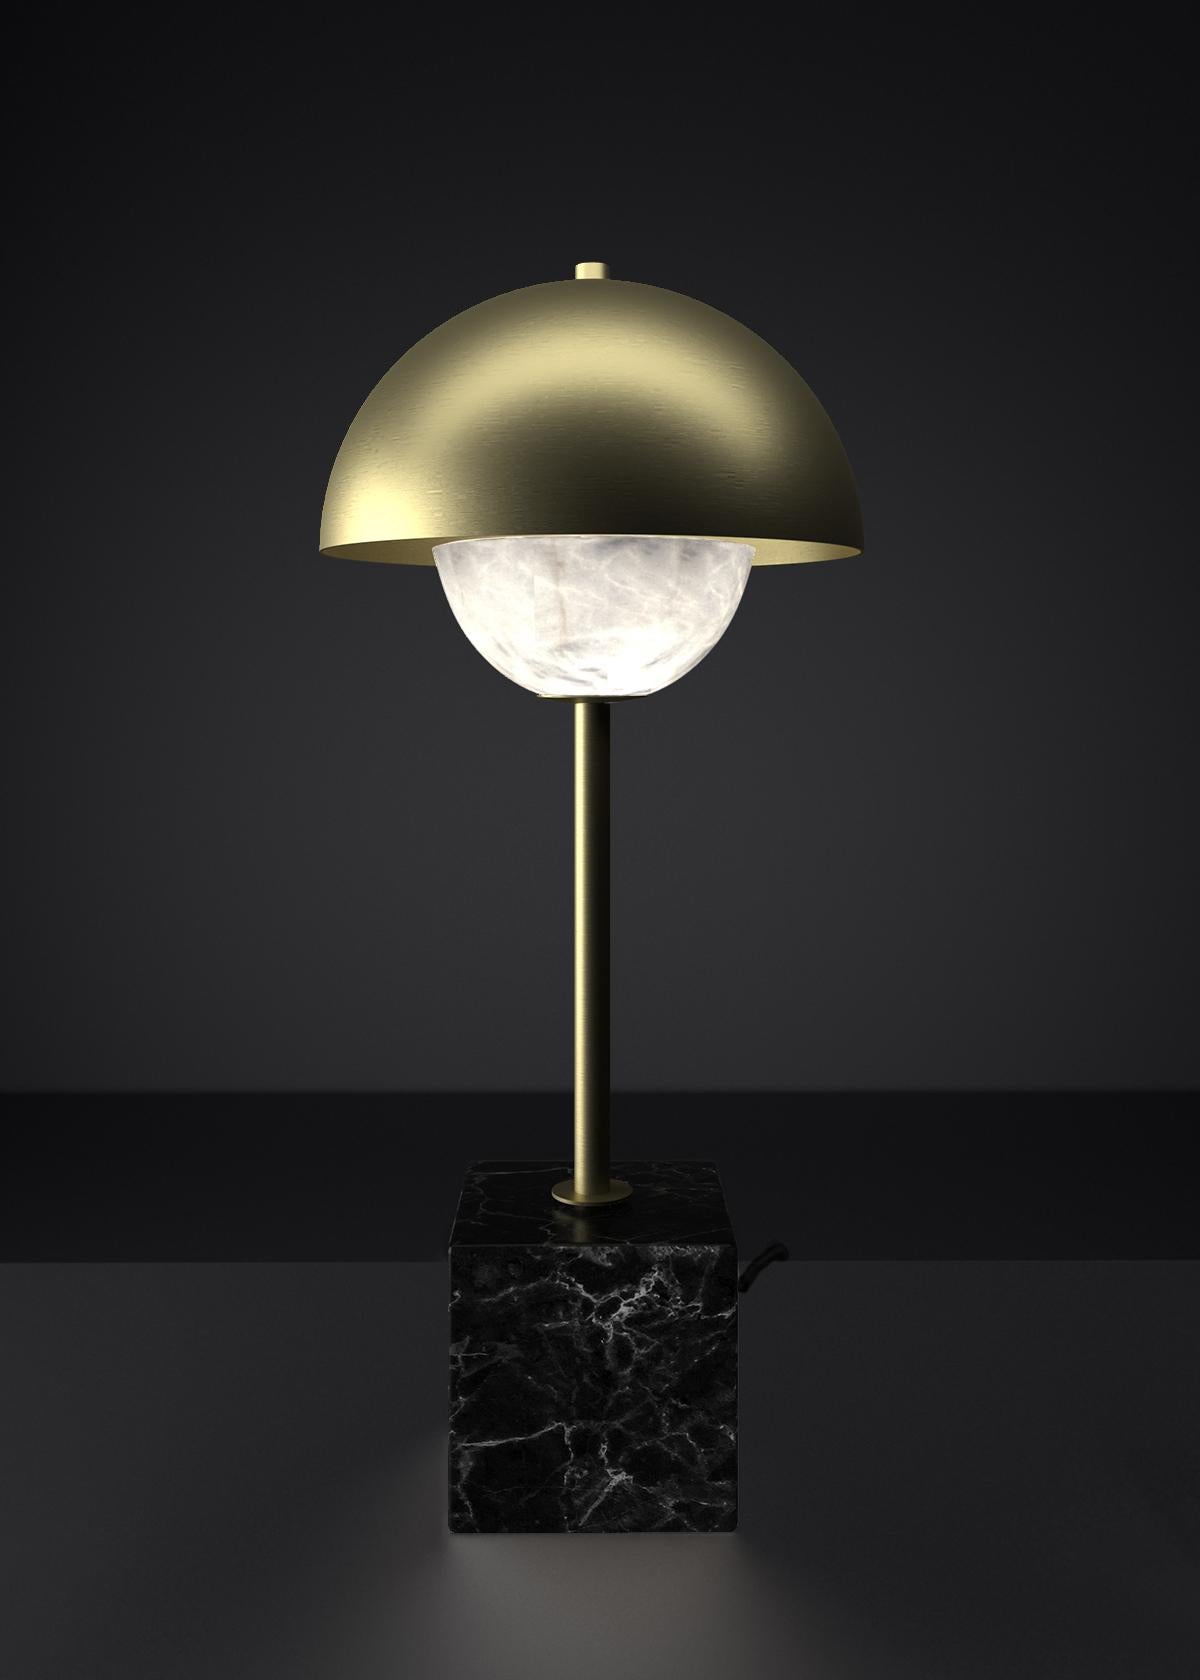 Apollo Brushed Brass Table Lamp by Alabastro Italiano
Dimensions: D 30 x W 30 x H 74 cm.
Materials: White alabaster, Nero Marquinia marble, black silk cables and brushed brass.

Available in different finishes: Shiny Silver, Bronze, Brushed Brass,